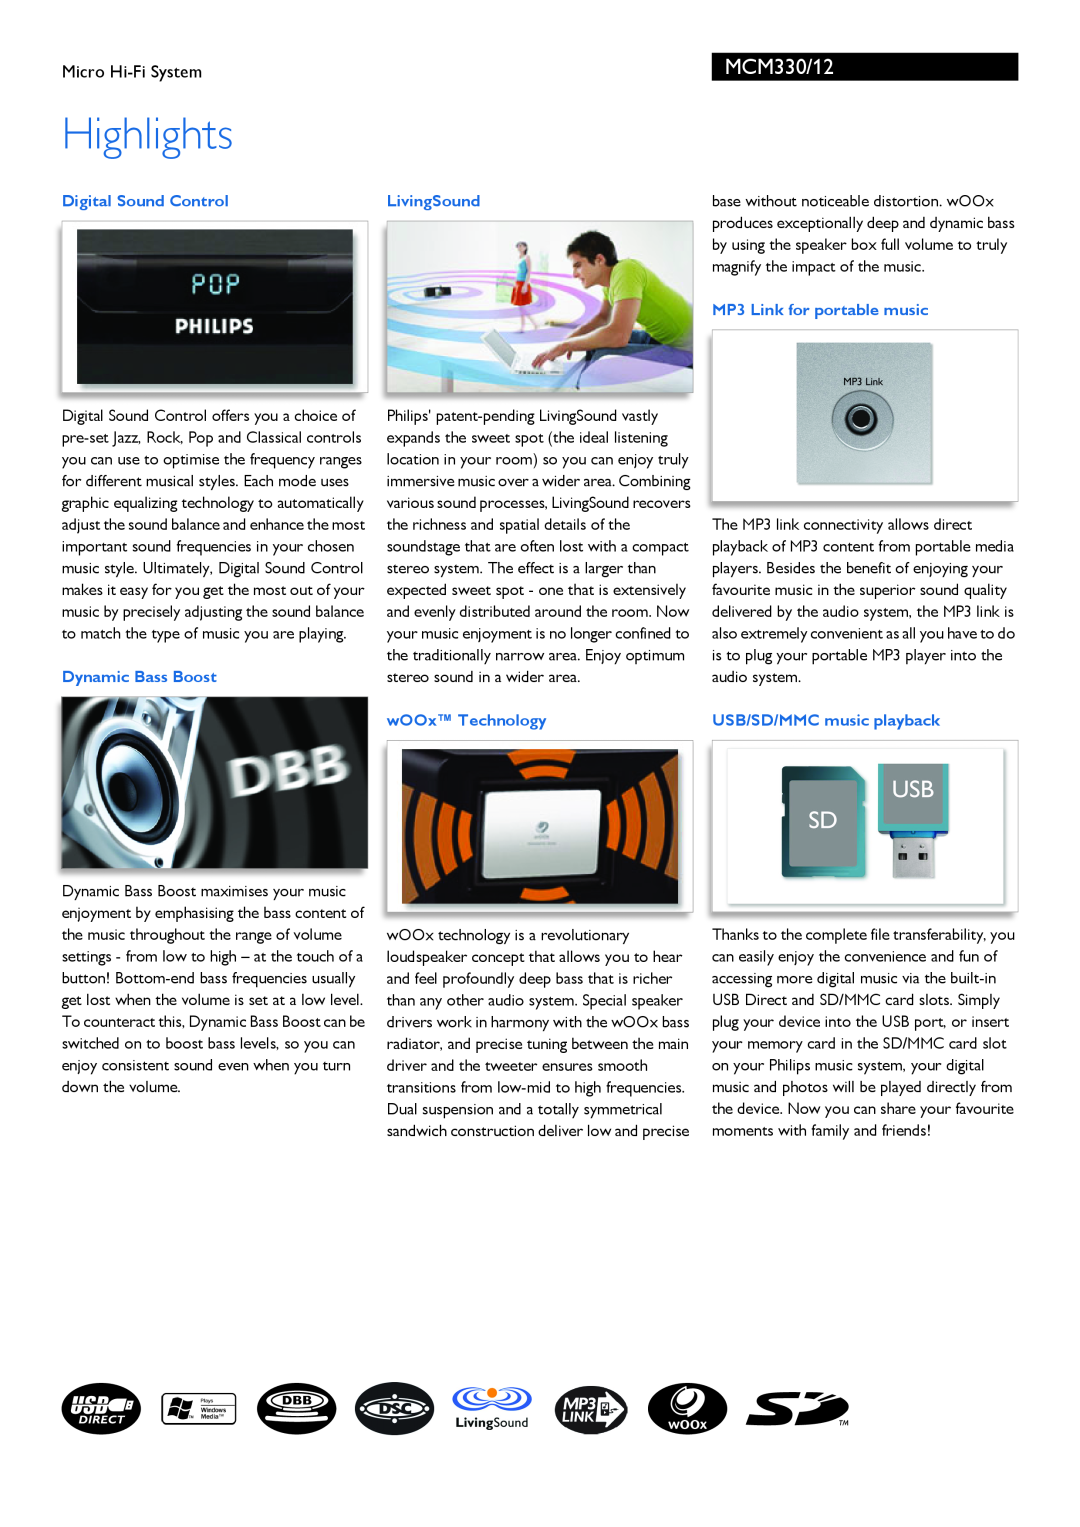 Philips MCM330/12 manual Highlights, Micro Hi-FiSystem, Digital Sound Control, LivingSound, magnify the impact of the music 